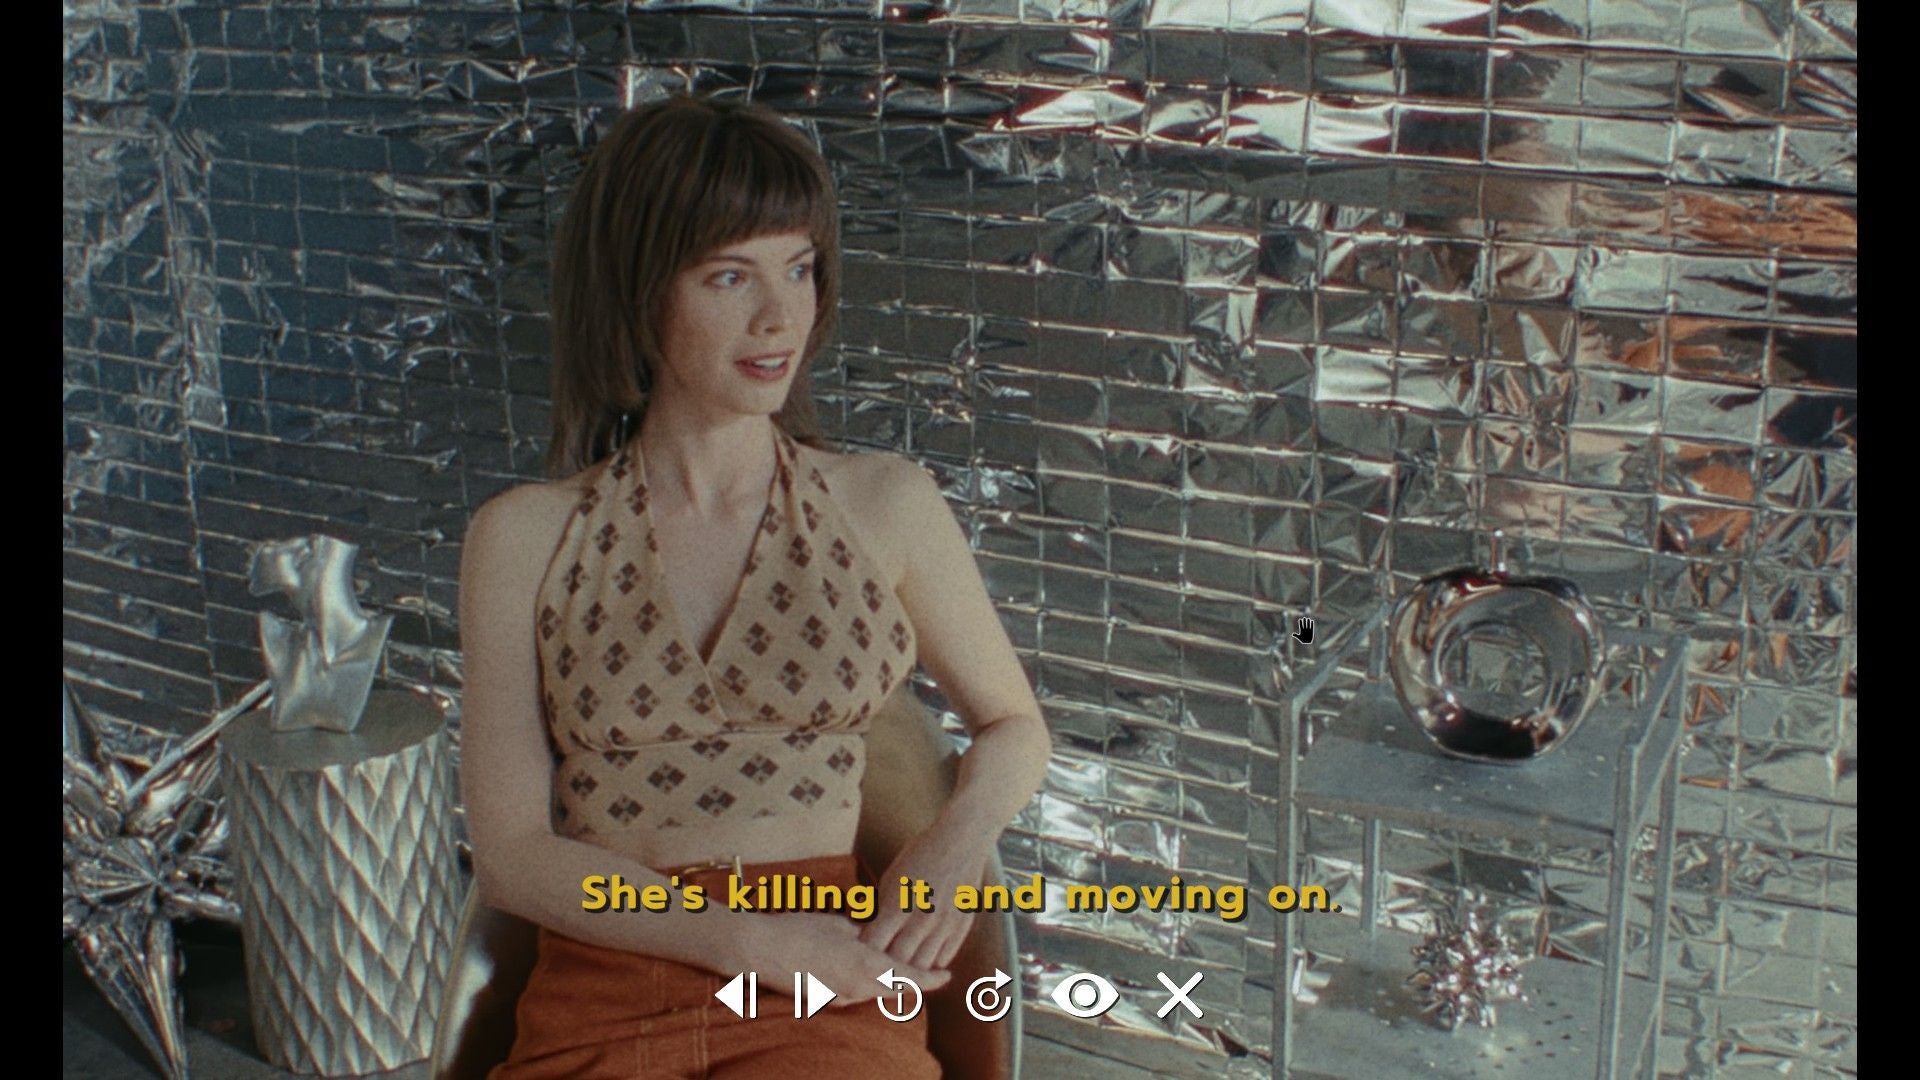 Immortality review - Marissa interviewed in front of a shiny reflective wall during a making-of documentary in 1970